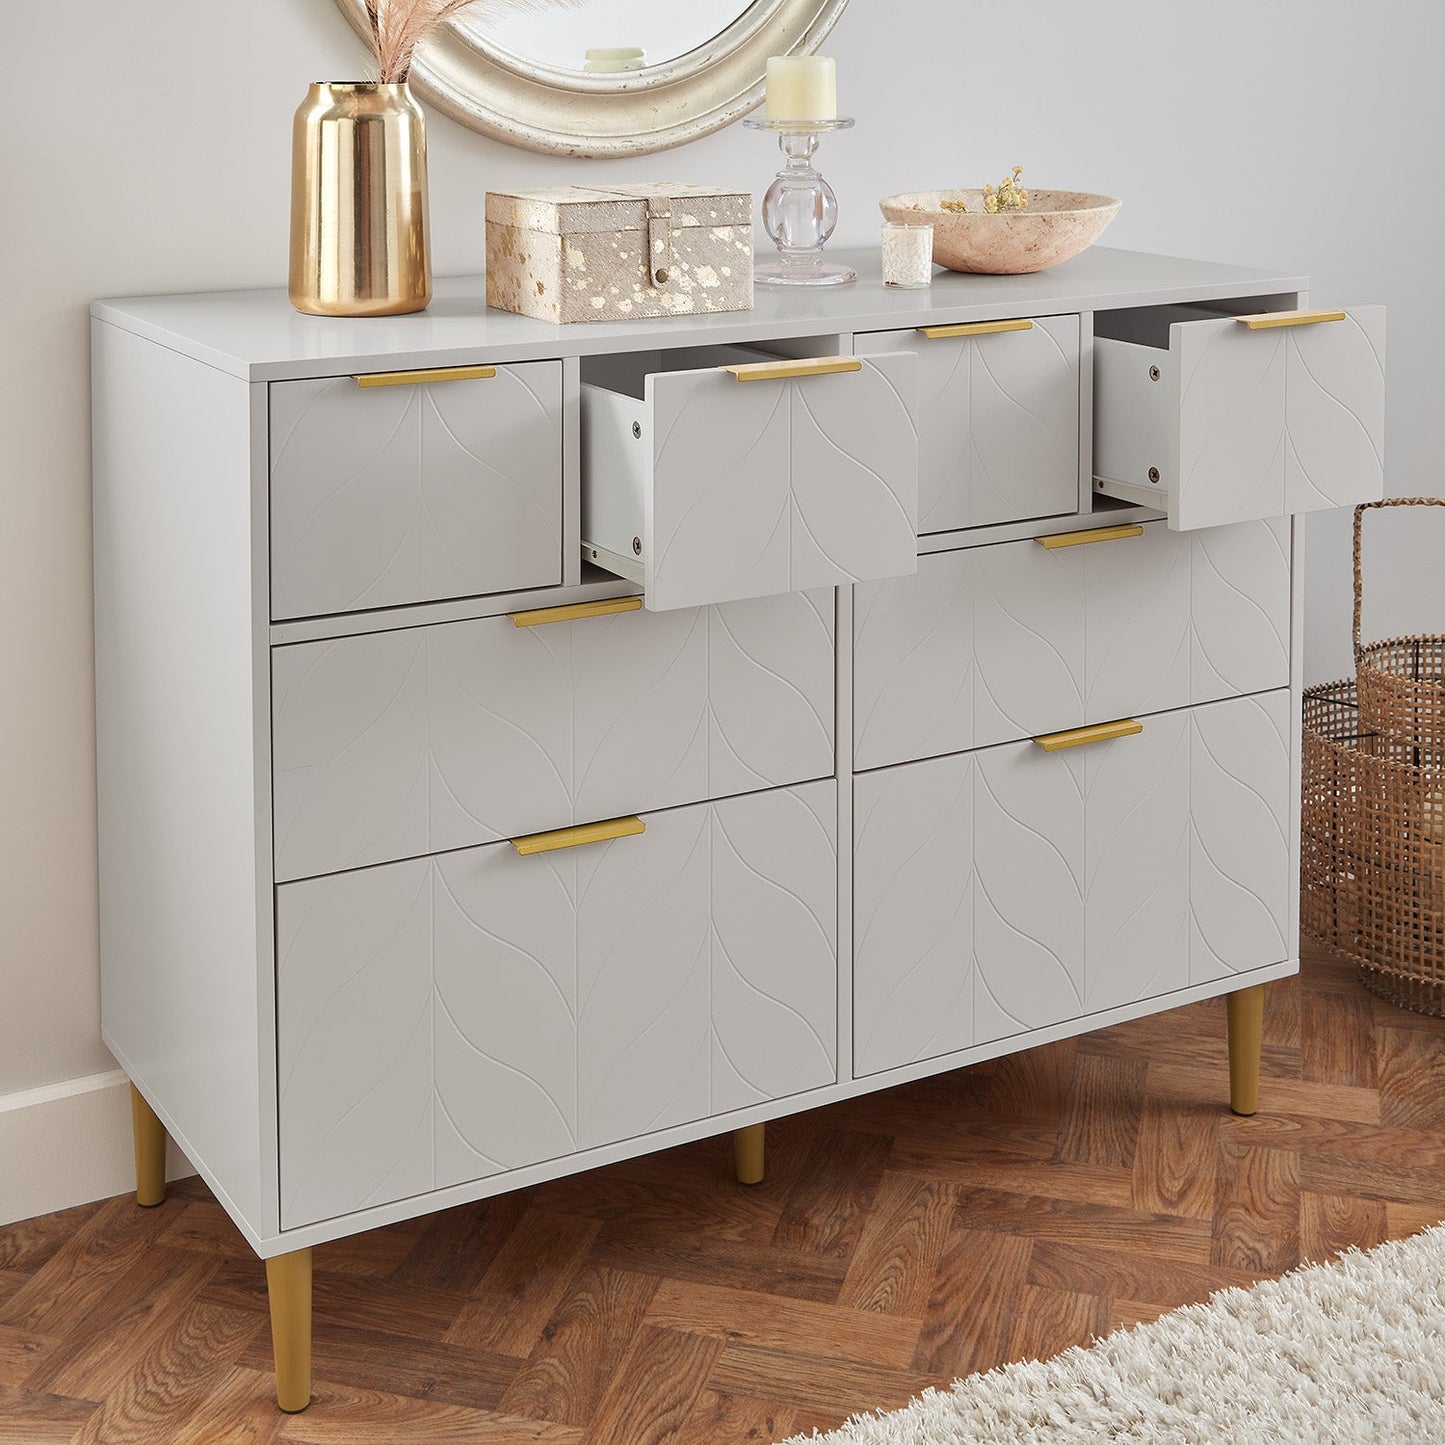 Gloria chest of drawers - 4 over 4 - grey & brass effect - laura James